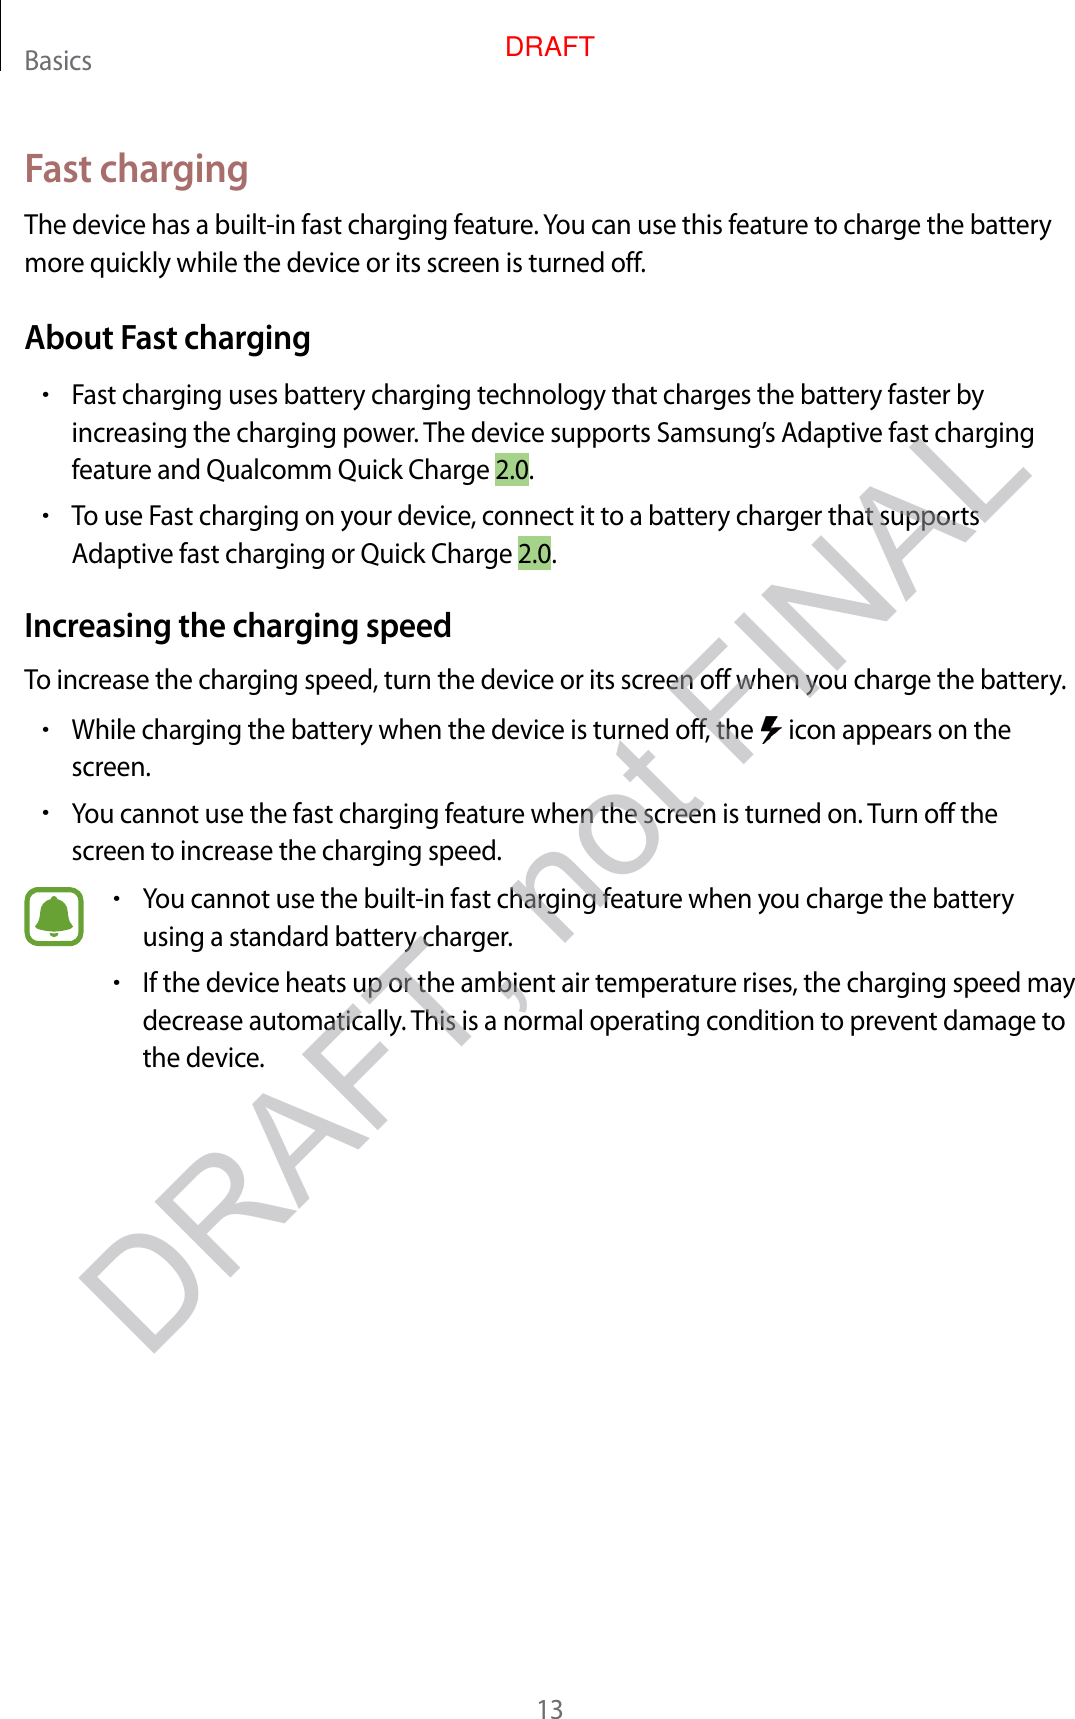 Basics13Fast chargingThe device has a built -in fast charg ing f ea tur e . You can use this featur e to char ge the batt ery more quickly while the device or its screen is turned off.About Fast charging•Fast charg ing uses batt ery charging technology that charges the ba ttery faster by increasing the char ging po w er. The device supports Samsung ’s Adaptiv e fast char ging featur e and Qualc omm Quick Charge 2.0.•To use Fast charg ing on y our device, connect it to a batt ery charger that supports Adaptiv e fast char ging or Quick Char ge 2.0.Increasing the charg ing speedTo increase the char ging speed , turn the device or its scr een off when y ou char ge the ba ttery.•While charg ing the batt ery when the device is turned off , the   icon appears on the screen.•You cannot use the fast charging featur e when the screen is turned on.  Turn off the screen to incr ease the char g ing speed .•You cannot use the built-in fast charging f eatur e when y ou char ge the batt ery using a standard batt ery charger.•If the device heats up or the ambient air tempera tur e rises, the char g ing speed ma y decrease automa tically. T his is a normal operating c ondition to pr ev en t damage to the device .DRAFT, not FINALDRAFT